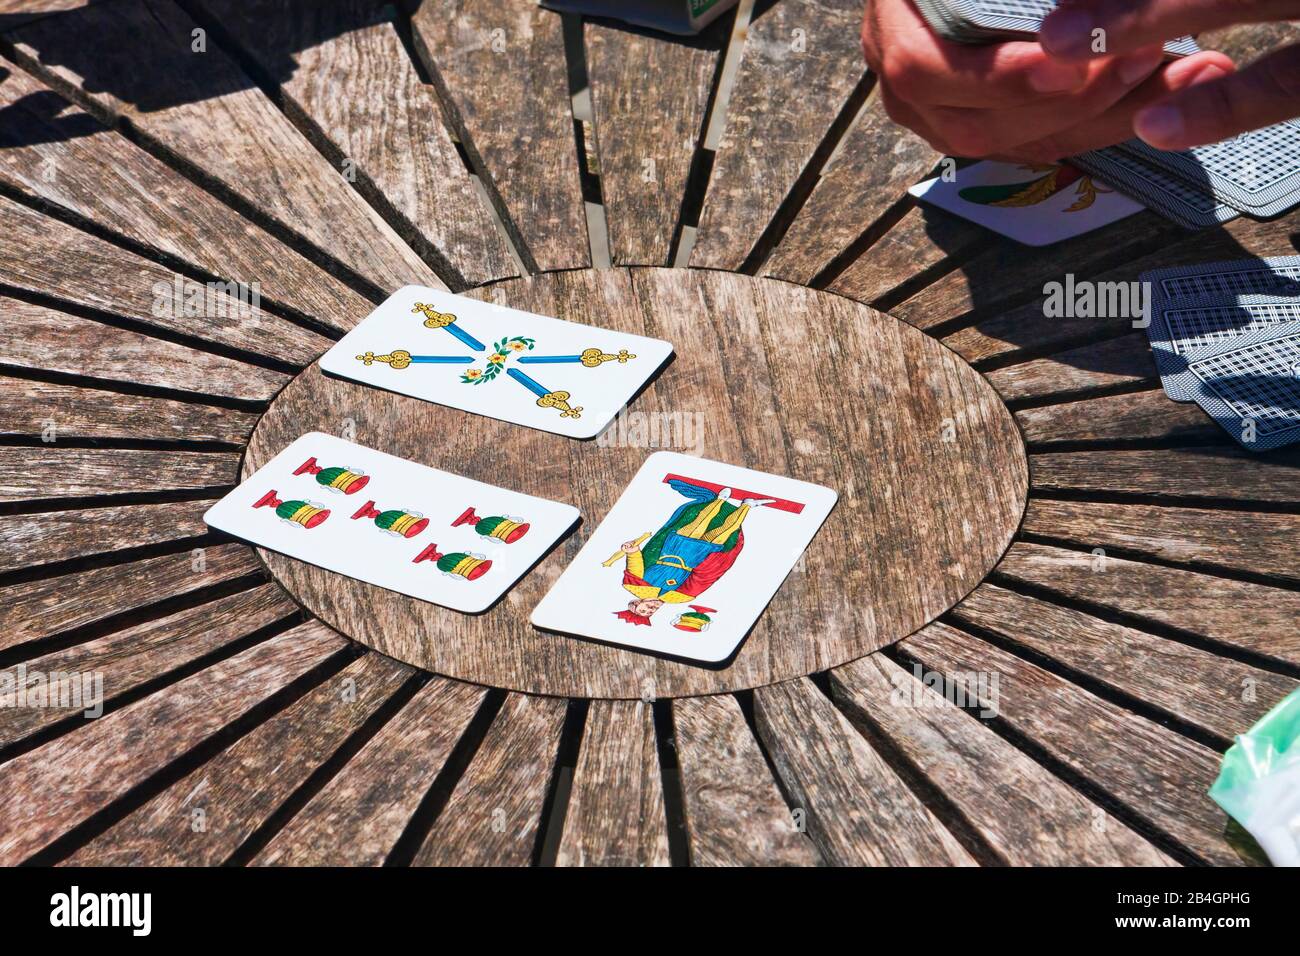 Turin, Italy - May 15, 2014: During coffee break, the employees play Trump in a circular wooden table, people enjoy traditional Neapolitan cards. Stock Photo